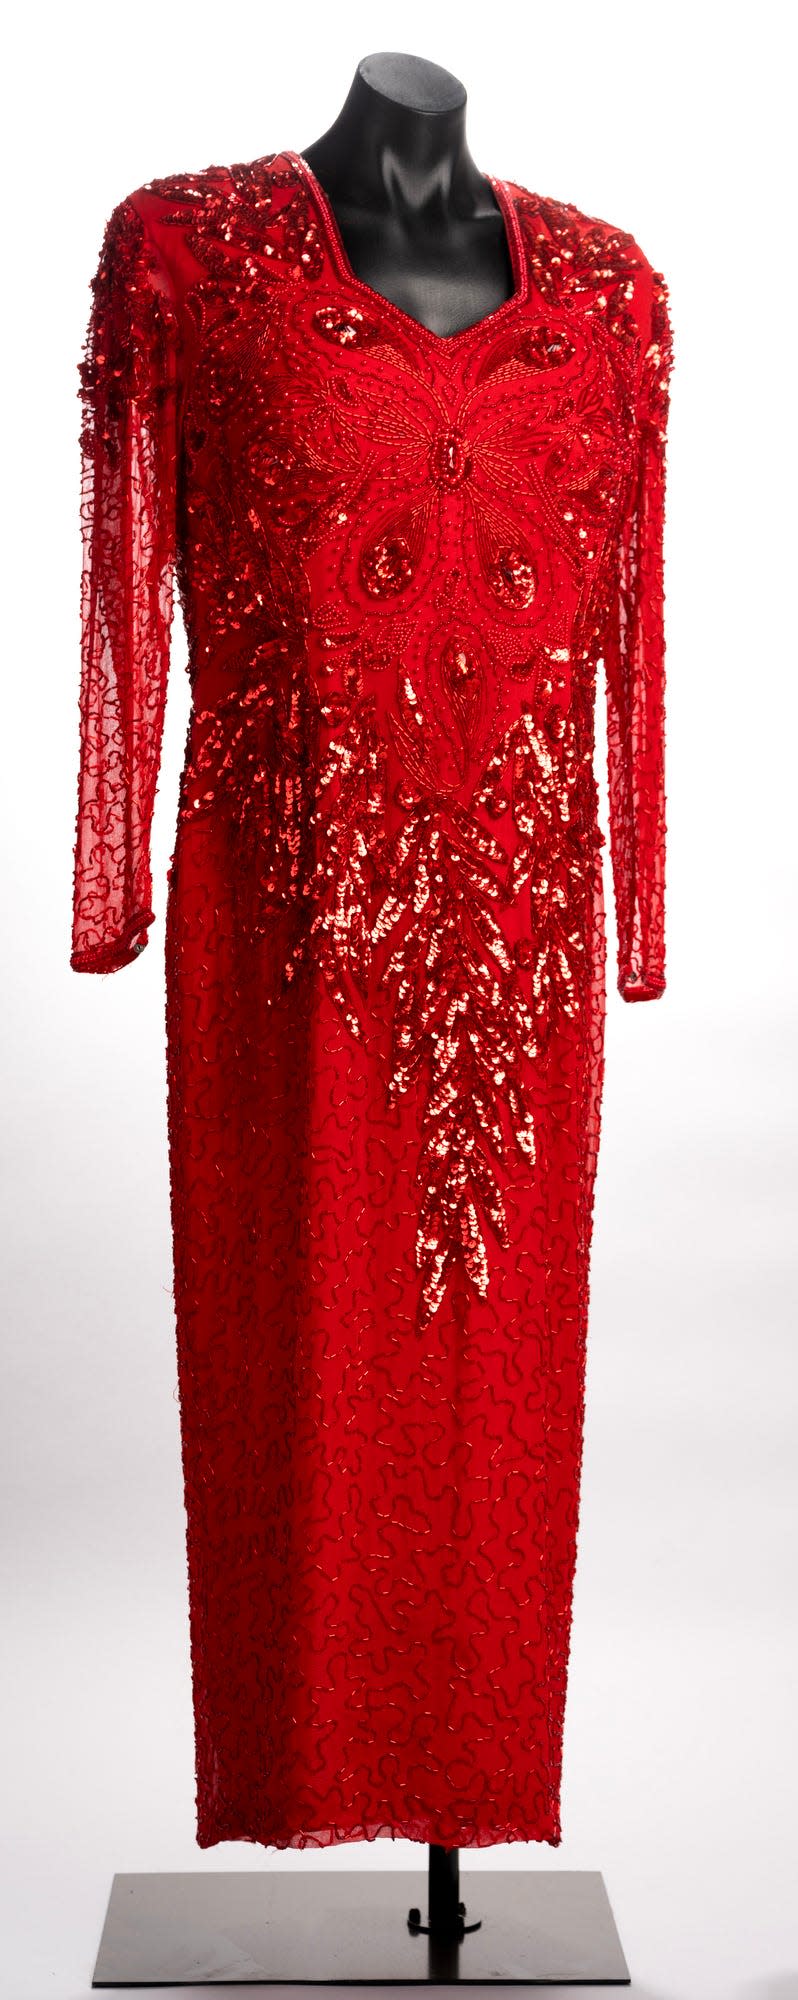 Koko Taylor's red beaded dress will be part of the "Music America" exhibit at the LBJ Presidential Library. After moving to Chicago in the 1950s, Taylor signed with Alligator Records in 1975. One of her signature songs is "Let the Good Times Roll."